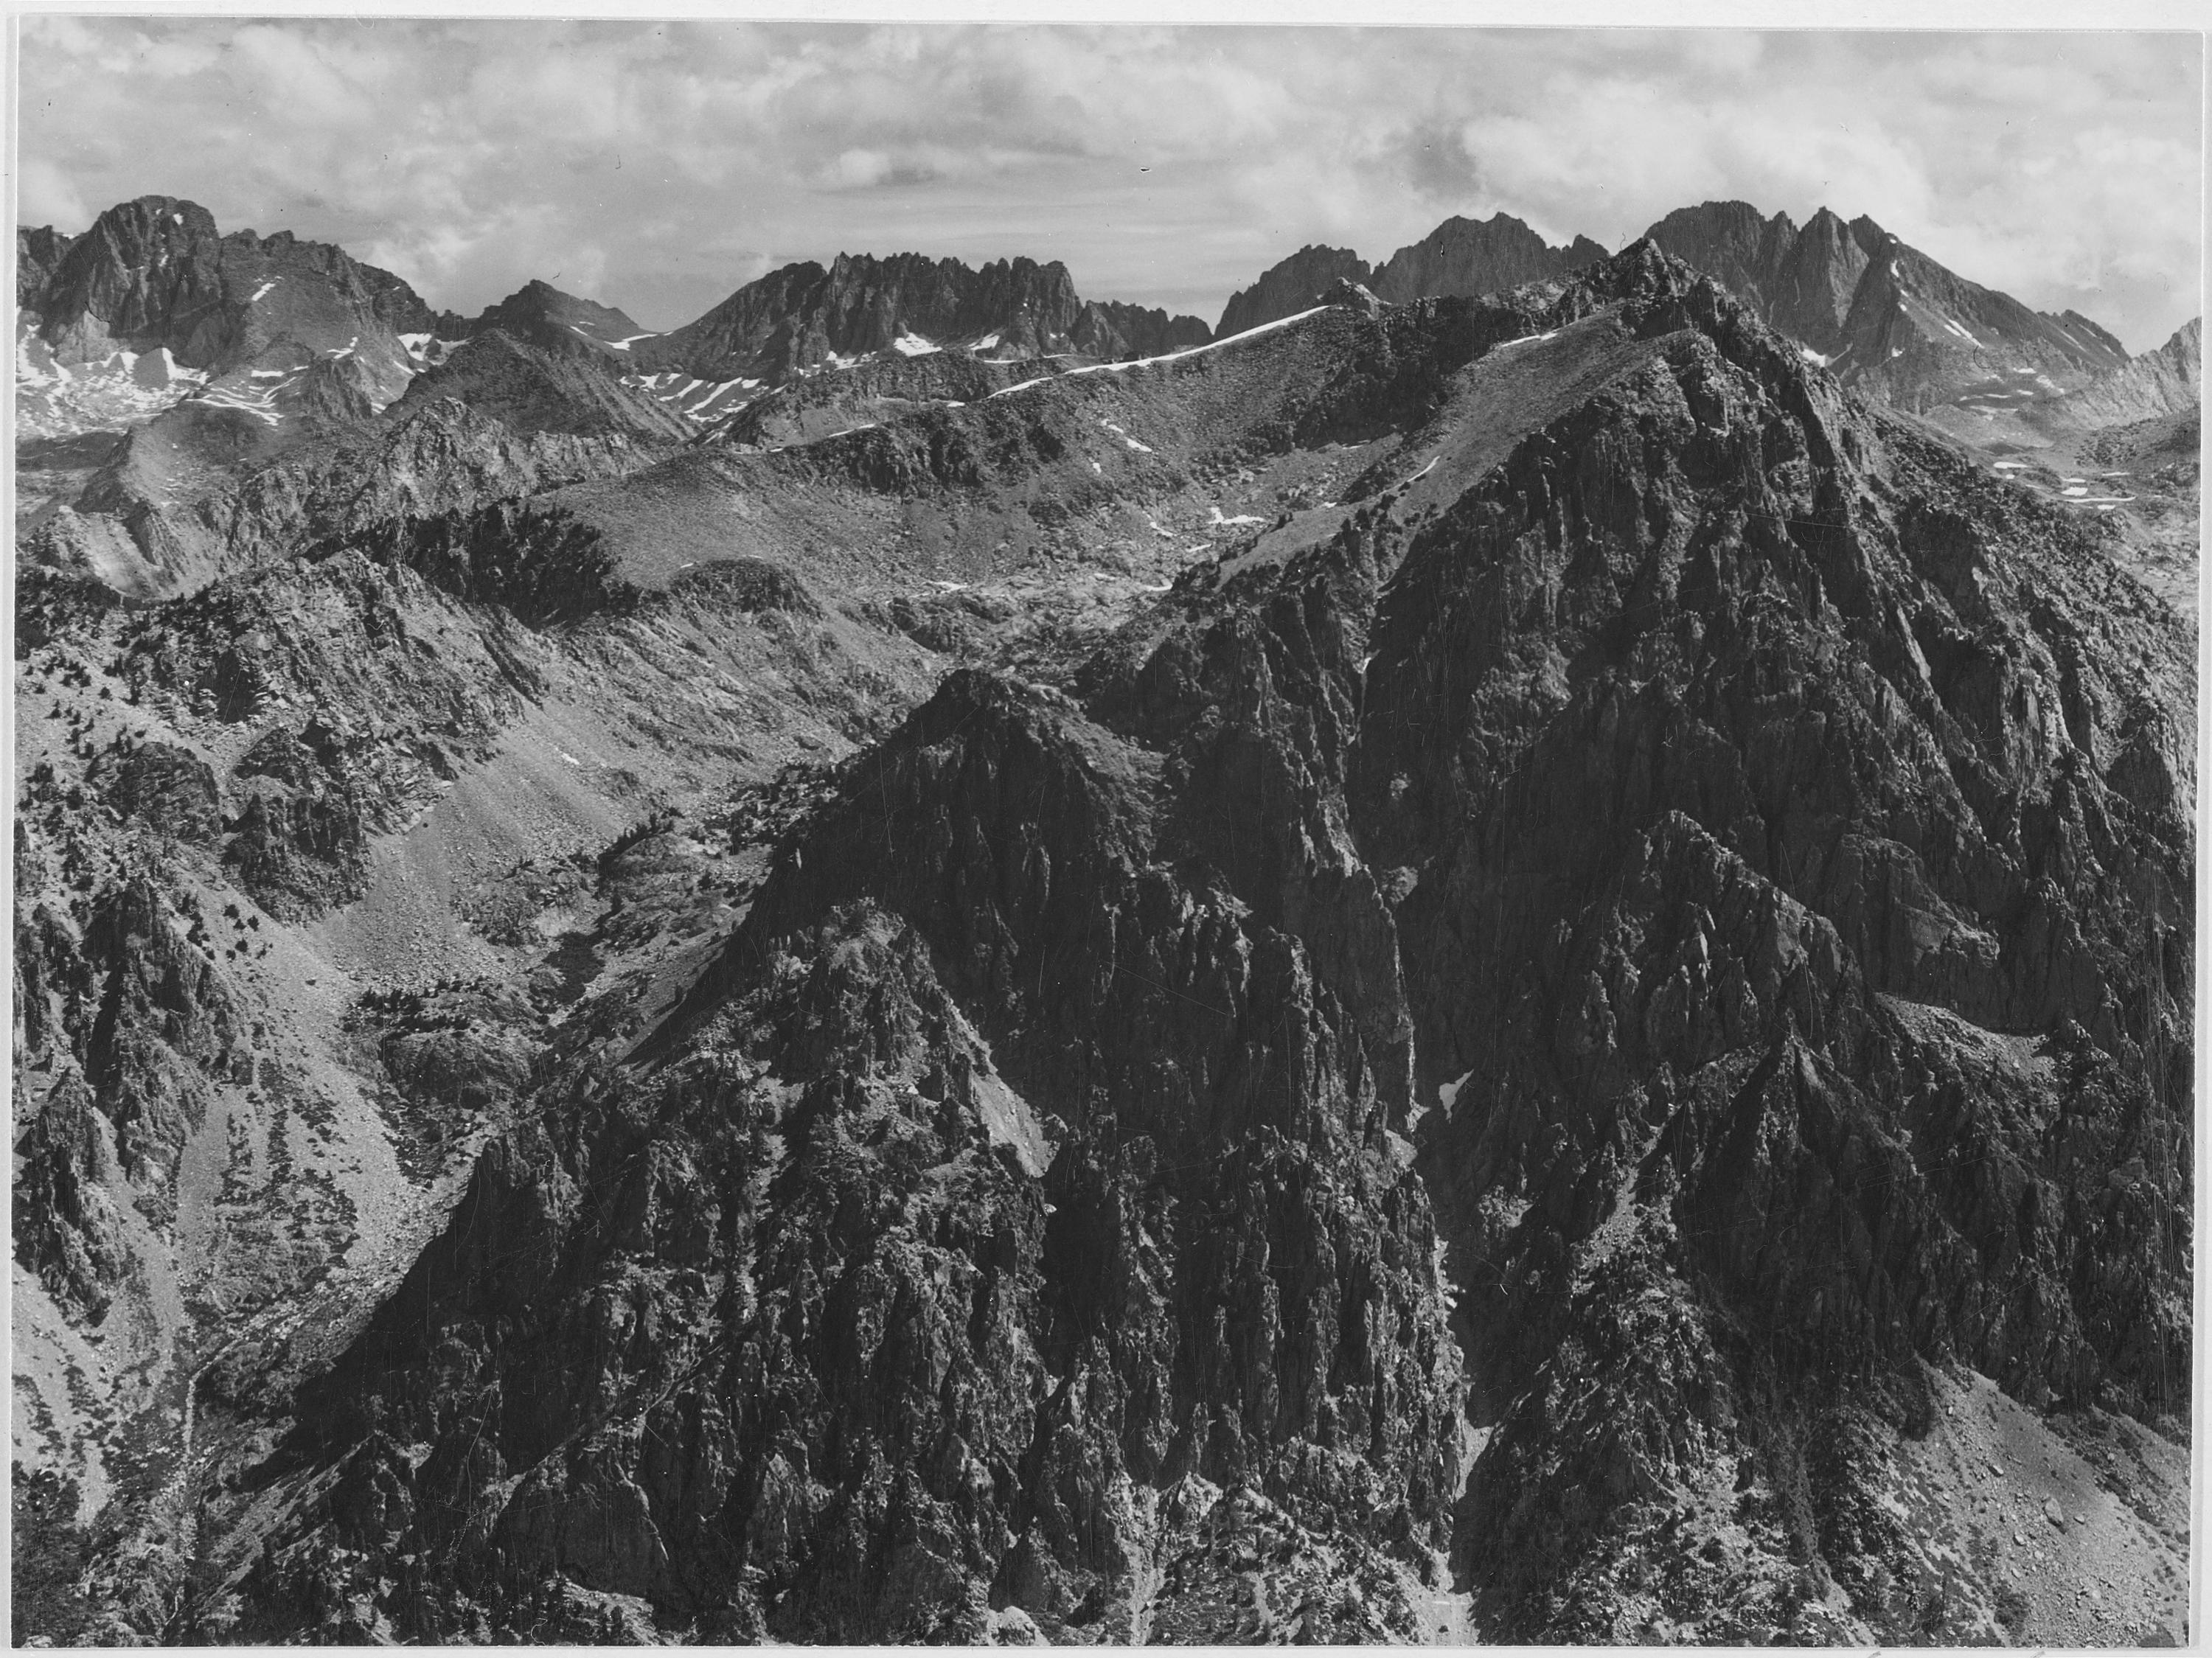 Ansel Adams - National Archives 79-AA-H22